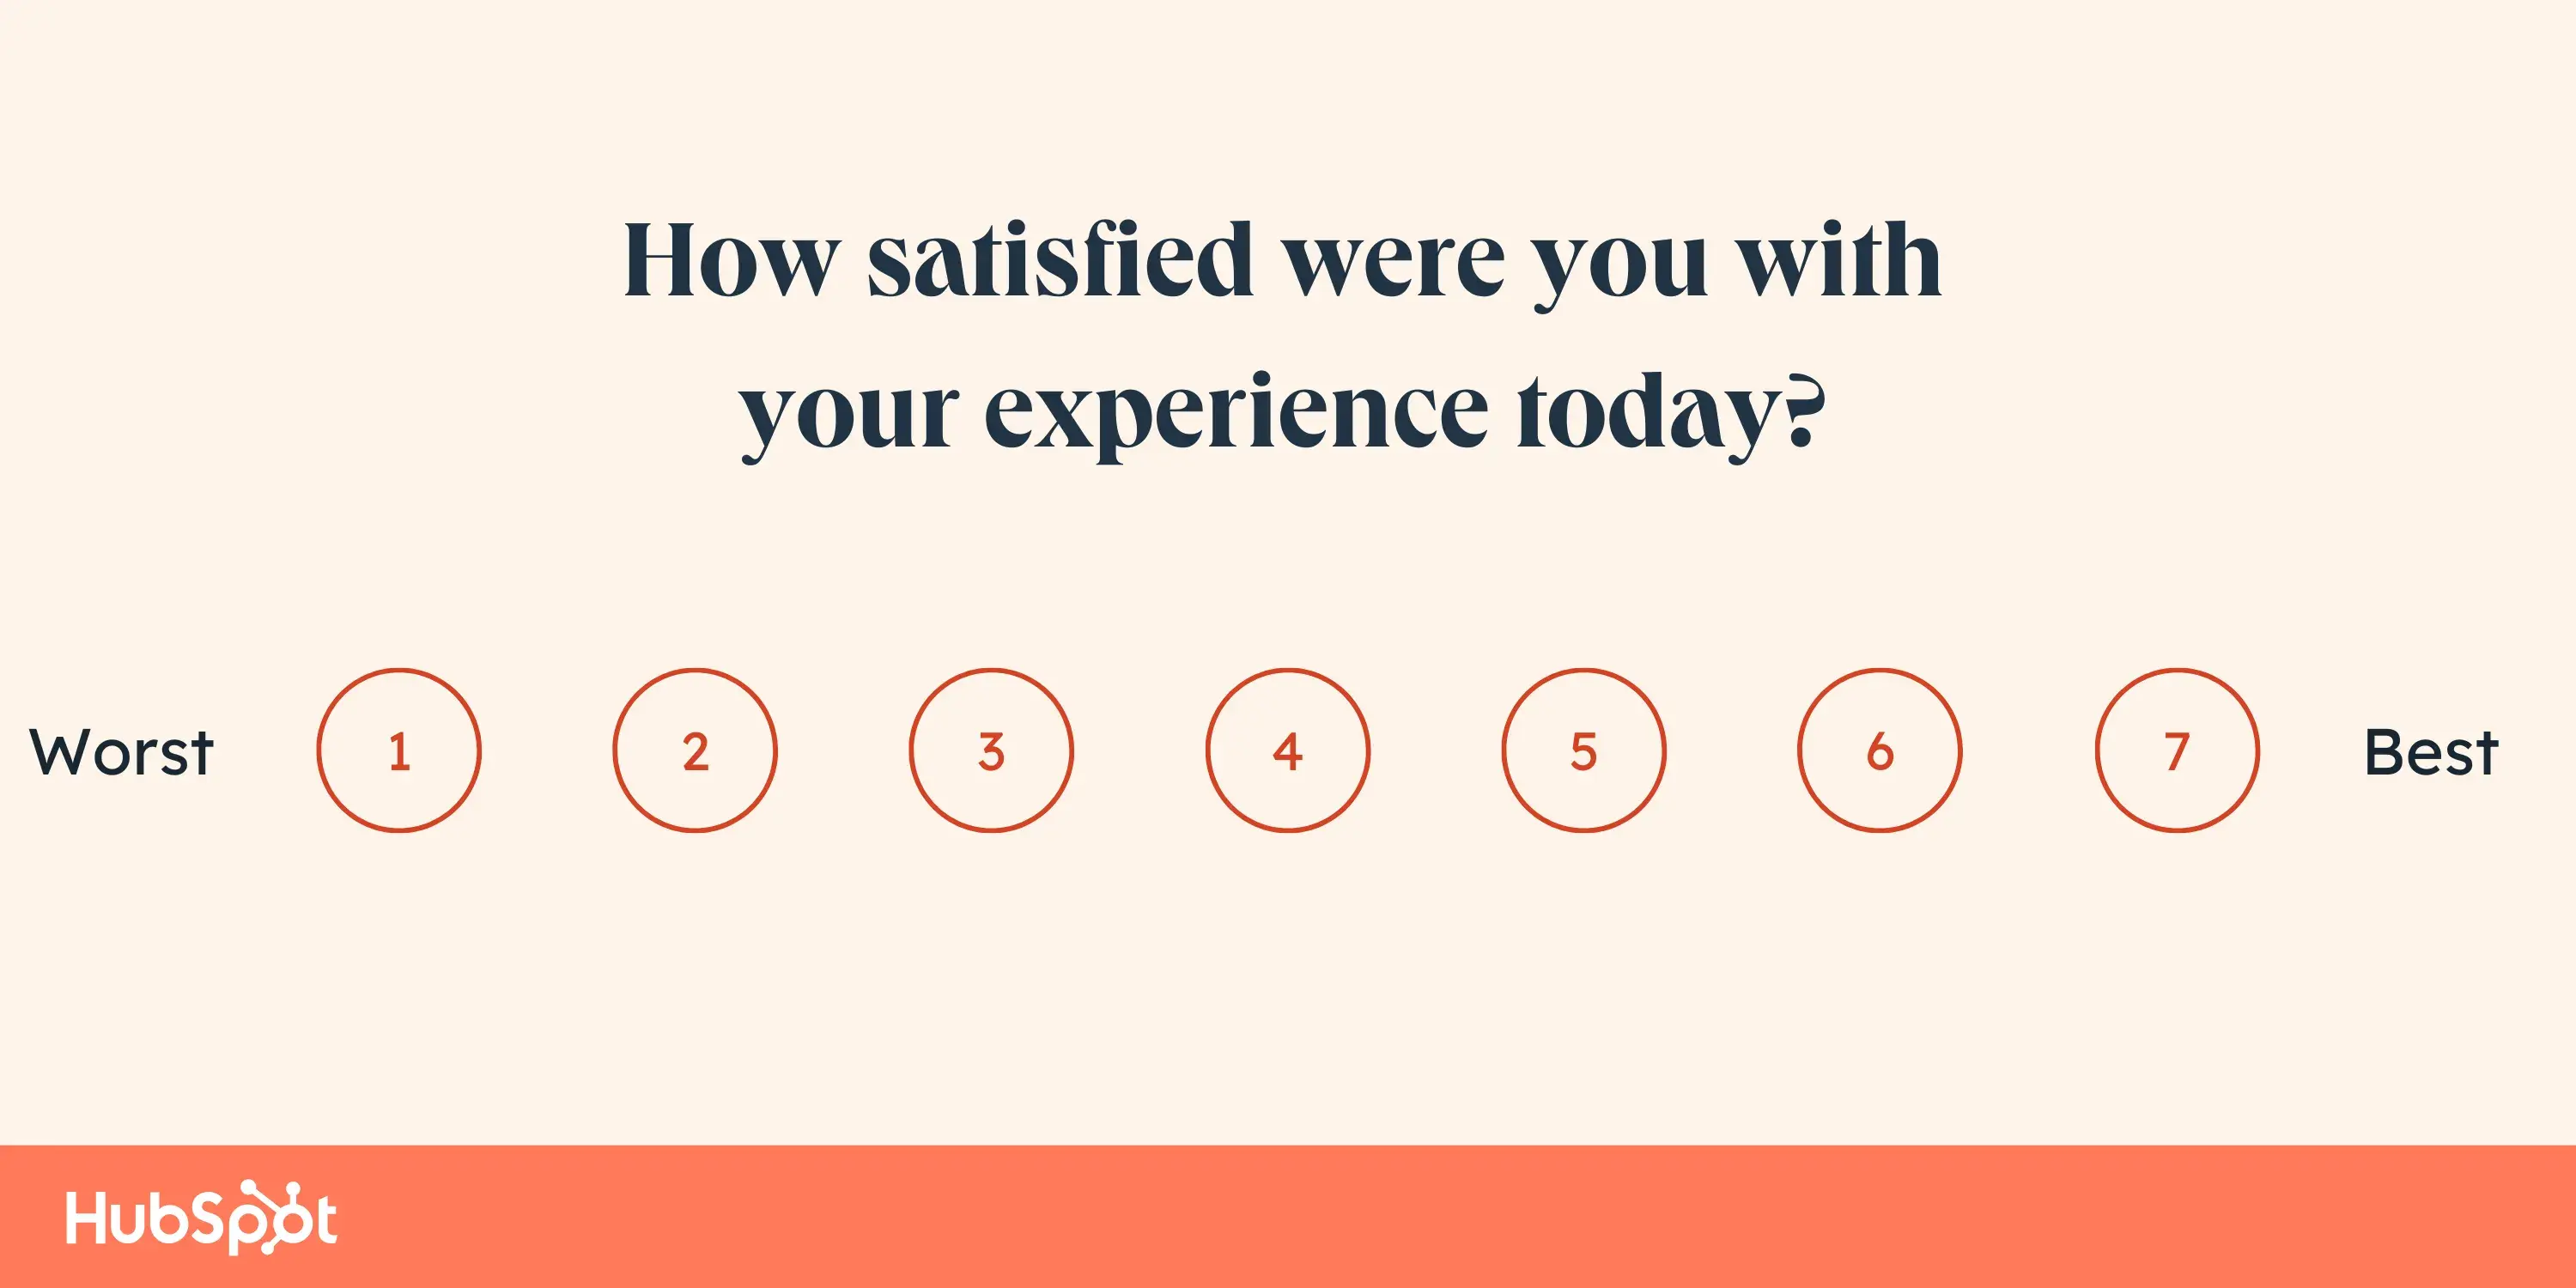 This 7-point customer experience survey from HubSpot answers the question, “What is a customer satisfaction survey?”